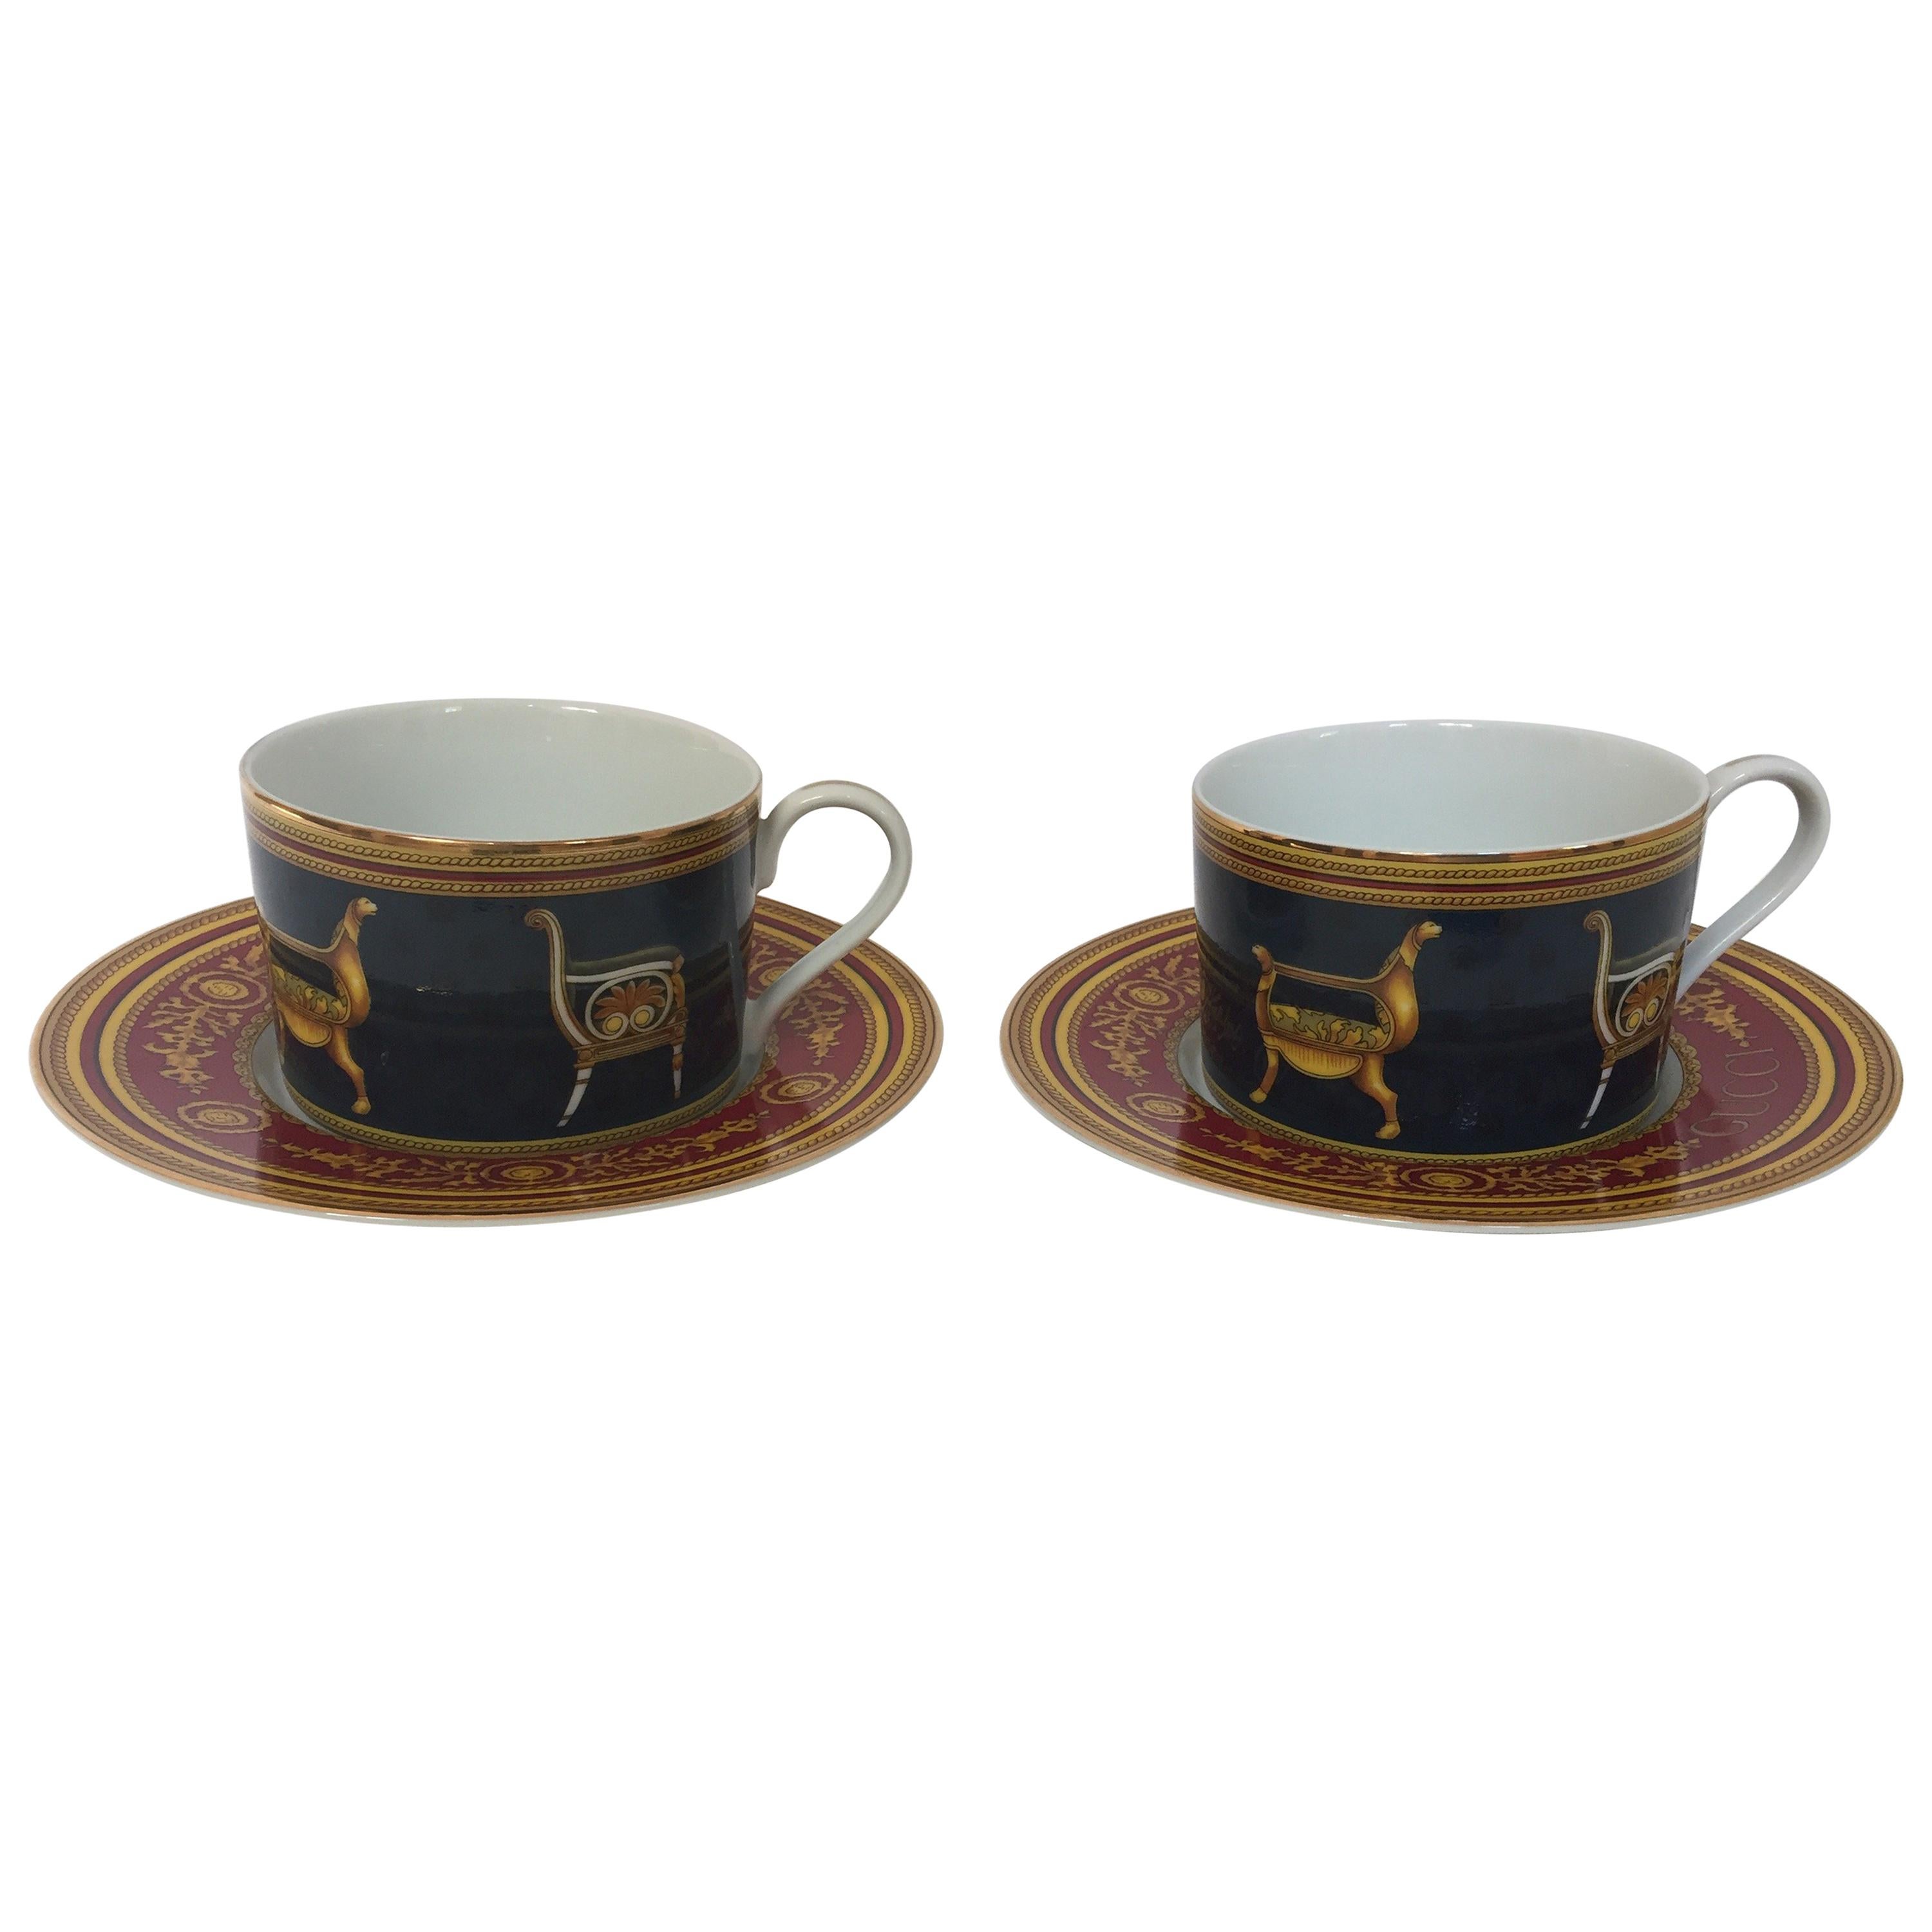 Gucci Porcelain Tea Cups and Saucers Set of 2